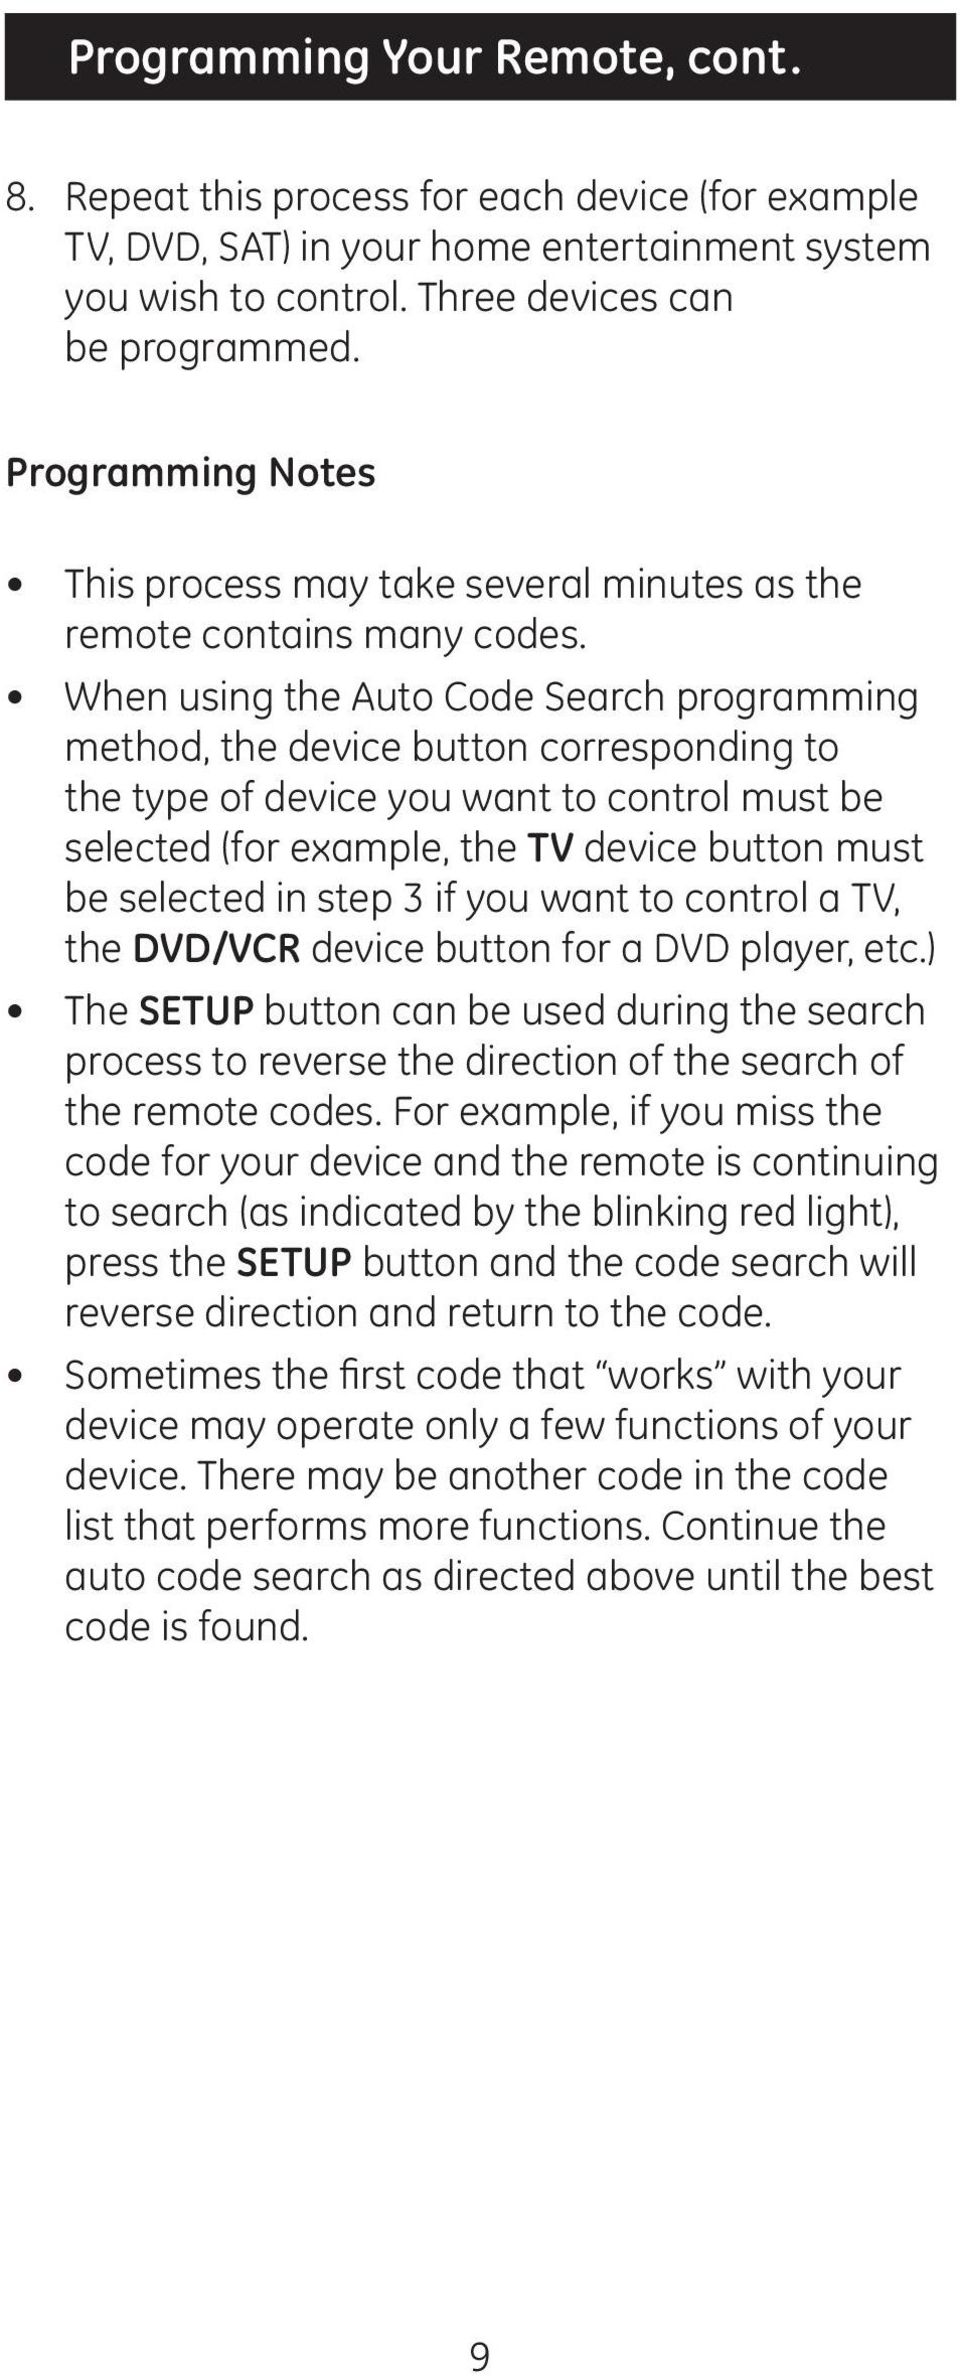 When using the Auto Code Search programming method, the device button corresponding to the type of device you want to control must be selected (for example, the TV device button must be selected in